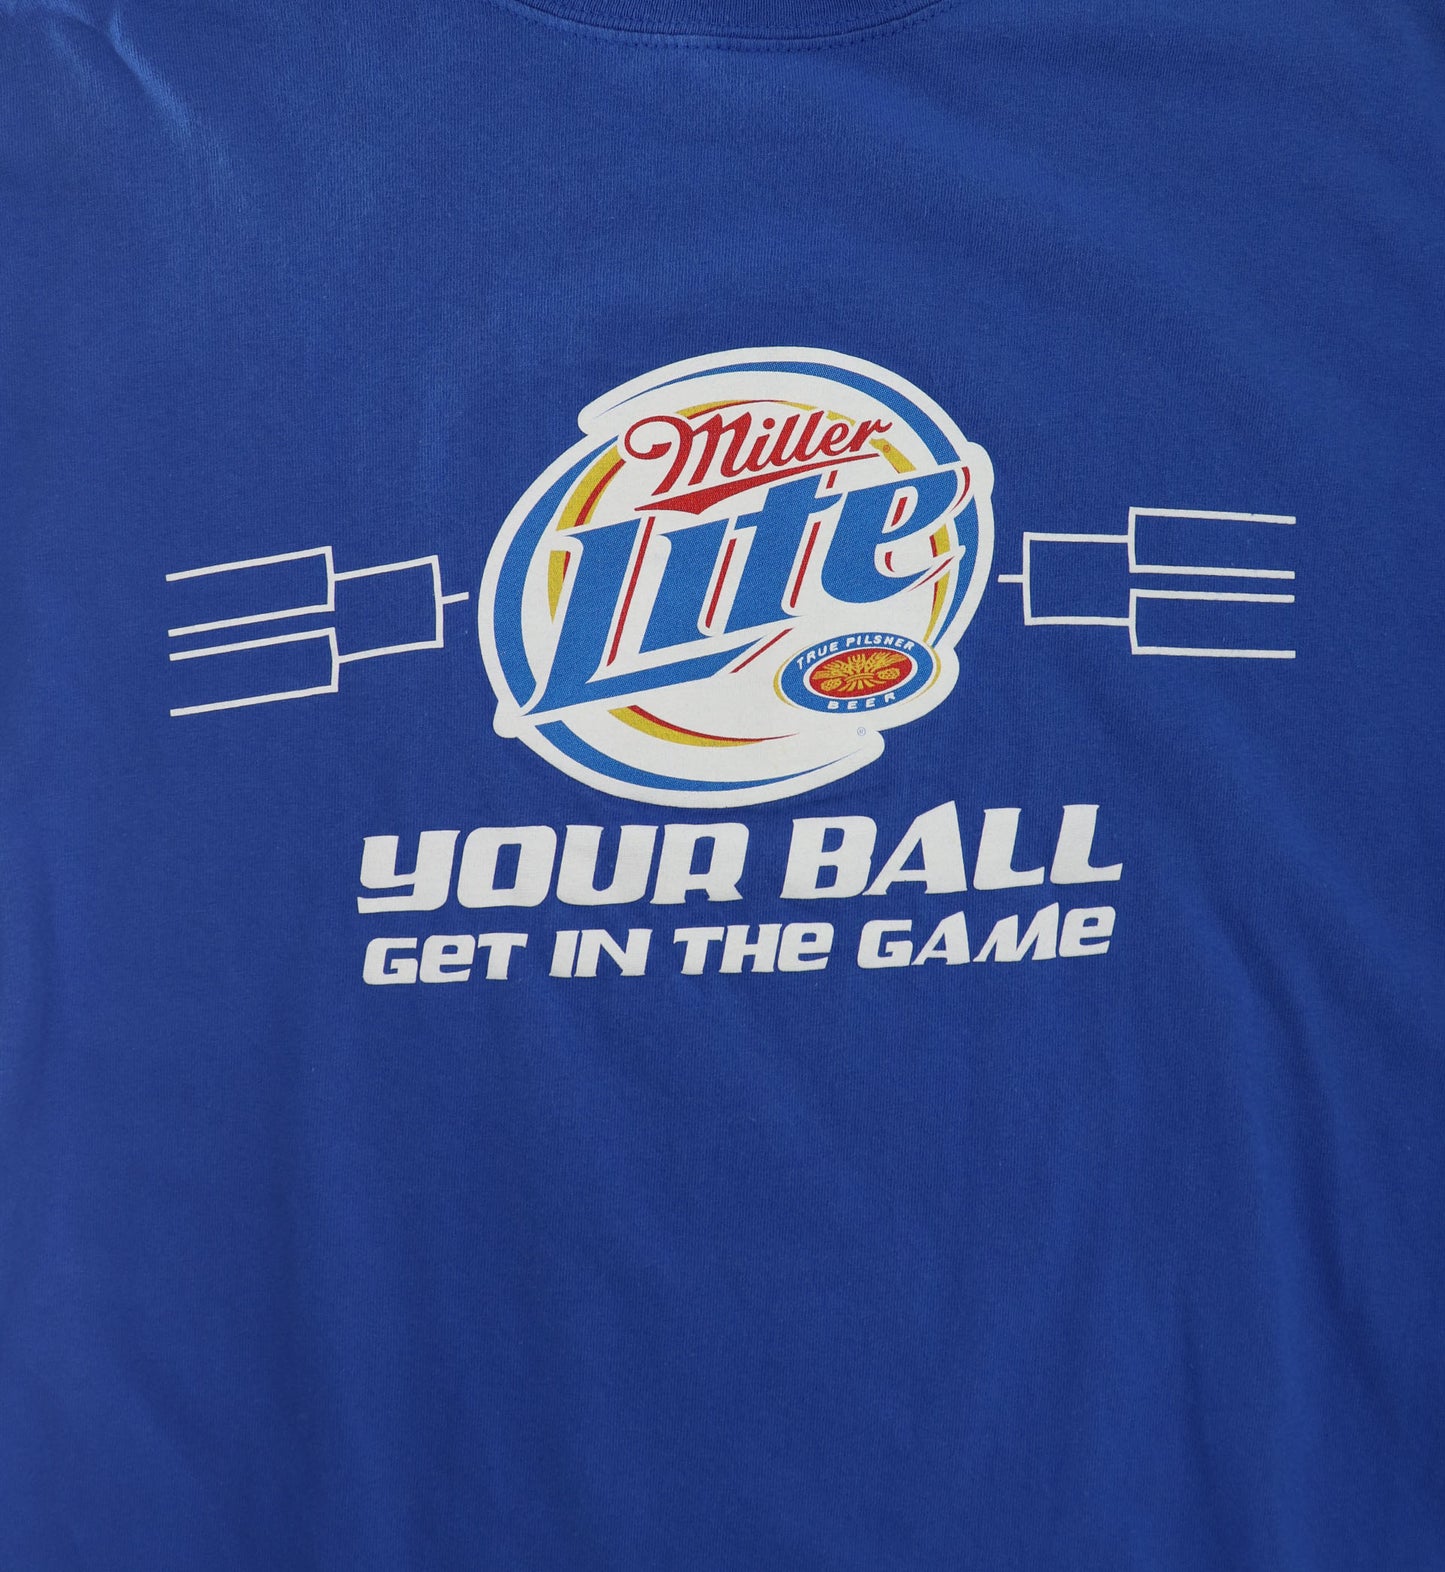 MILLER LITE YOUR BALL GET IN THE GAME